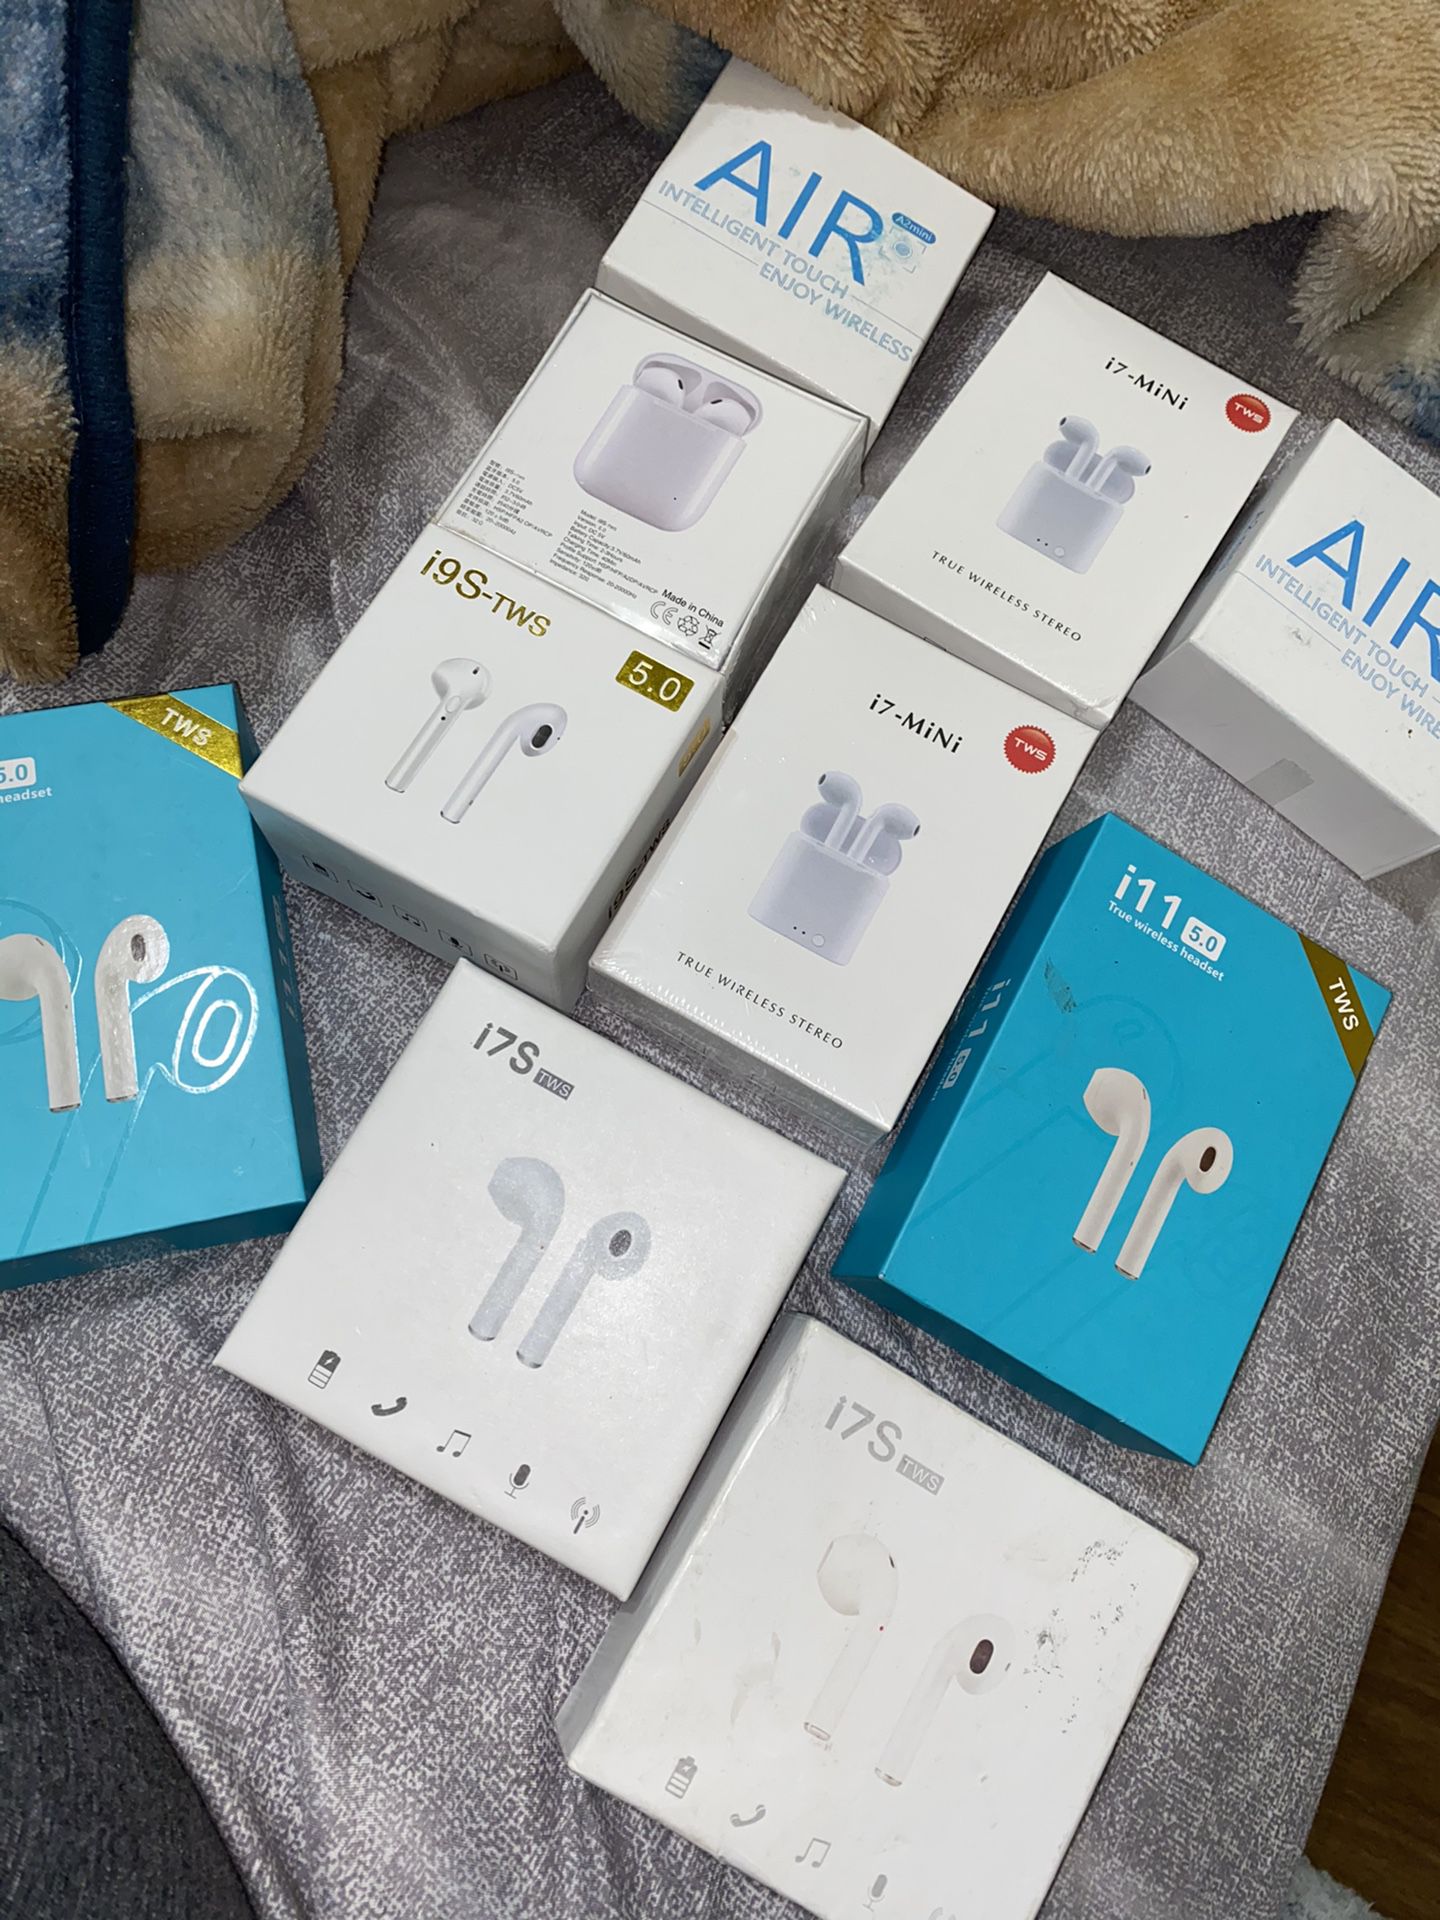 Wireless ear buds works for ihphone and android, comes with iPhone plug in piece